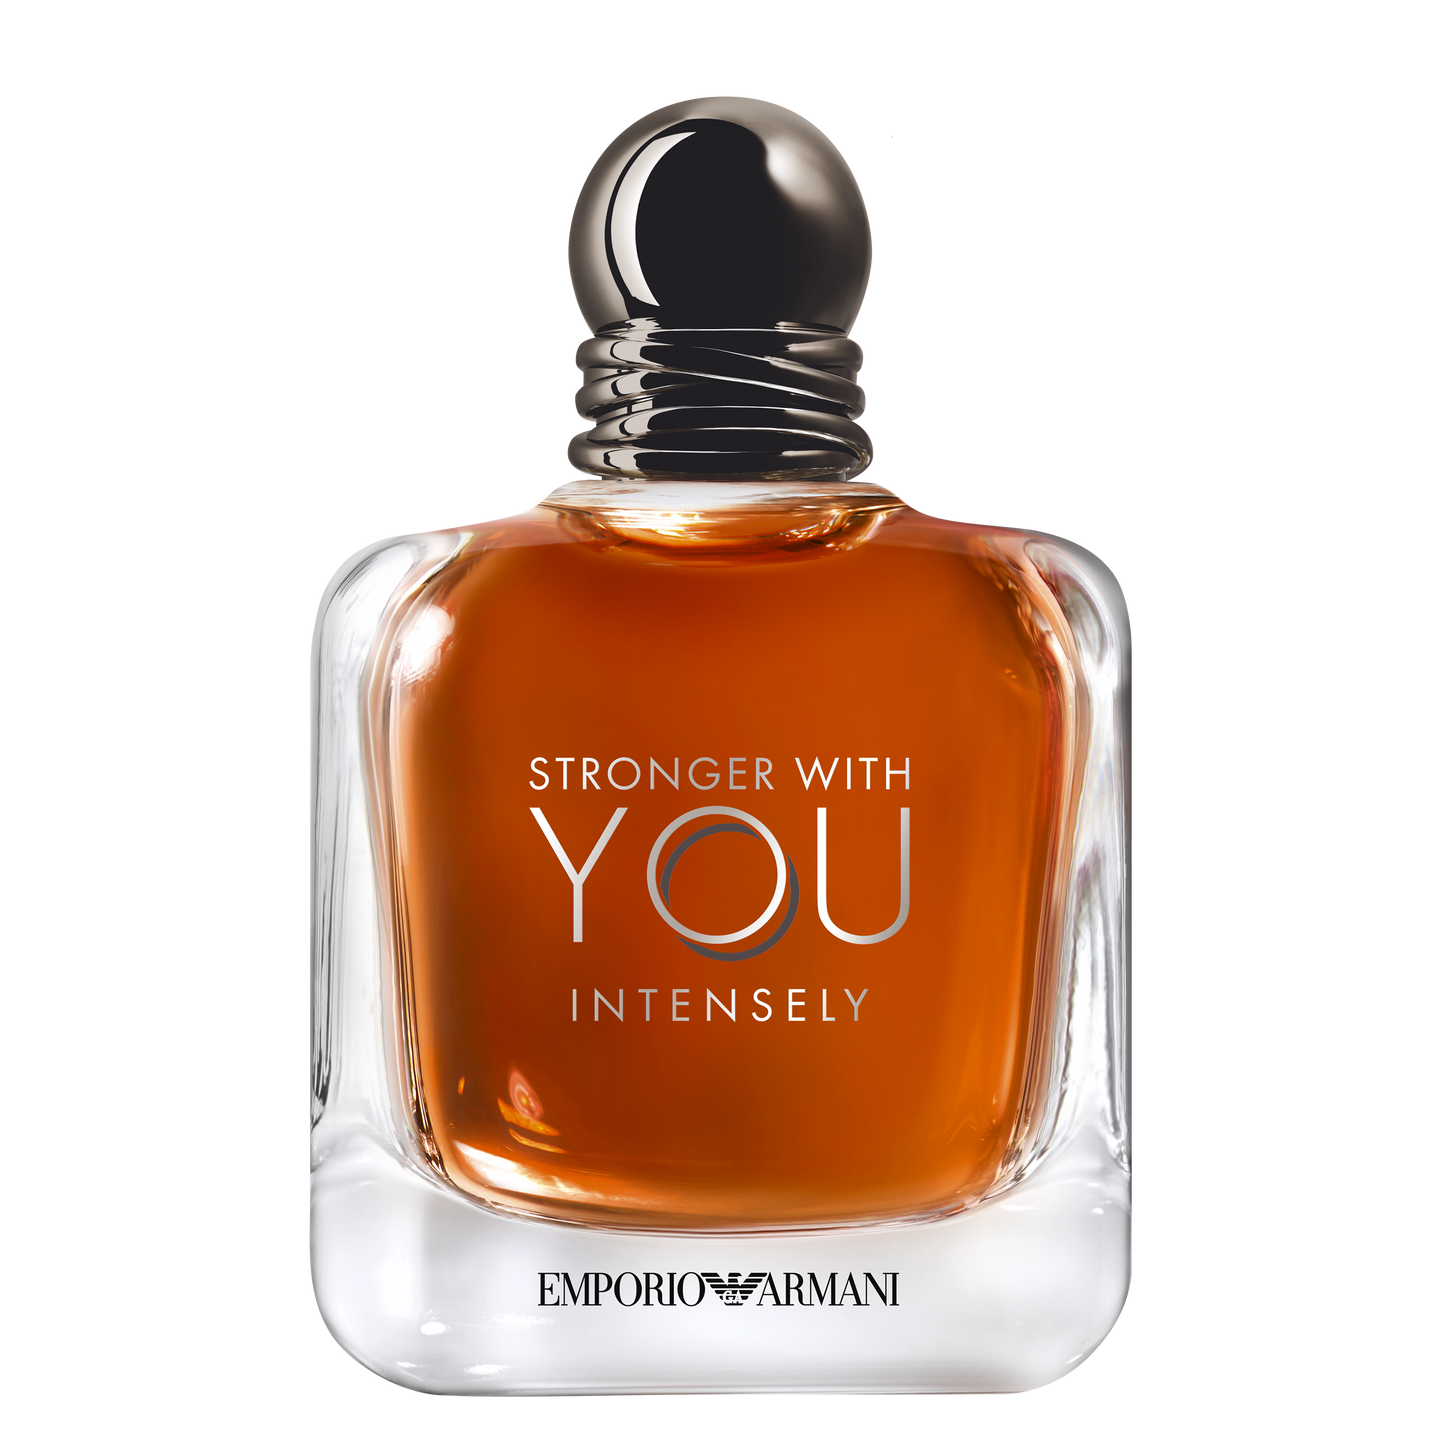 EMPORIO ARMANI Stronger with You Intensely